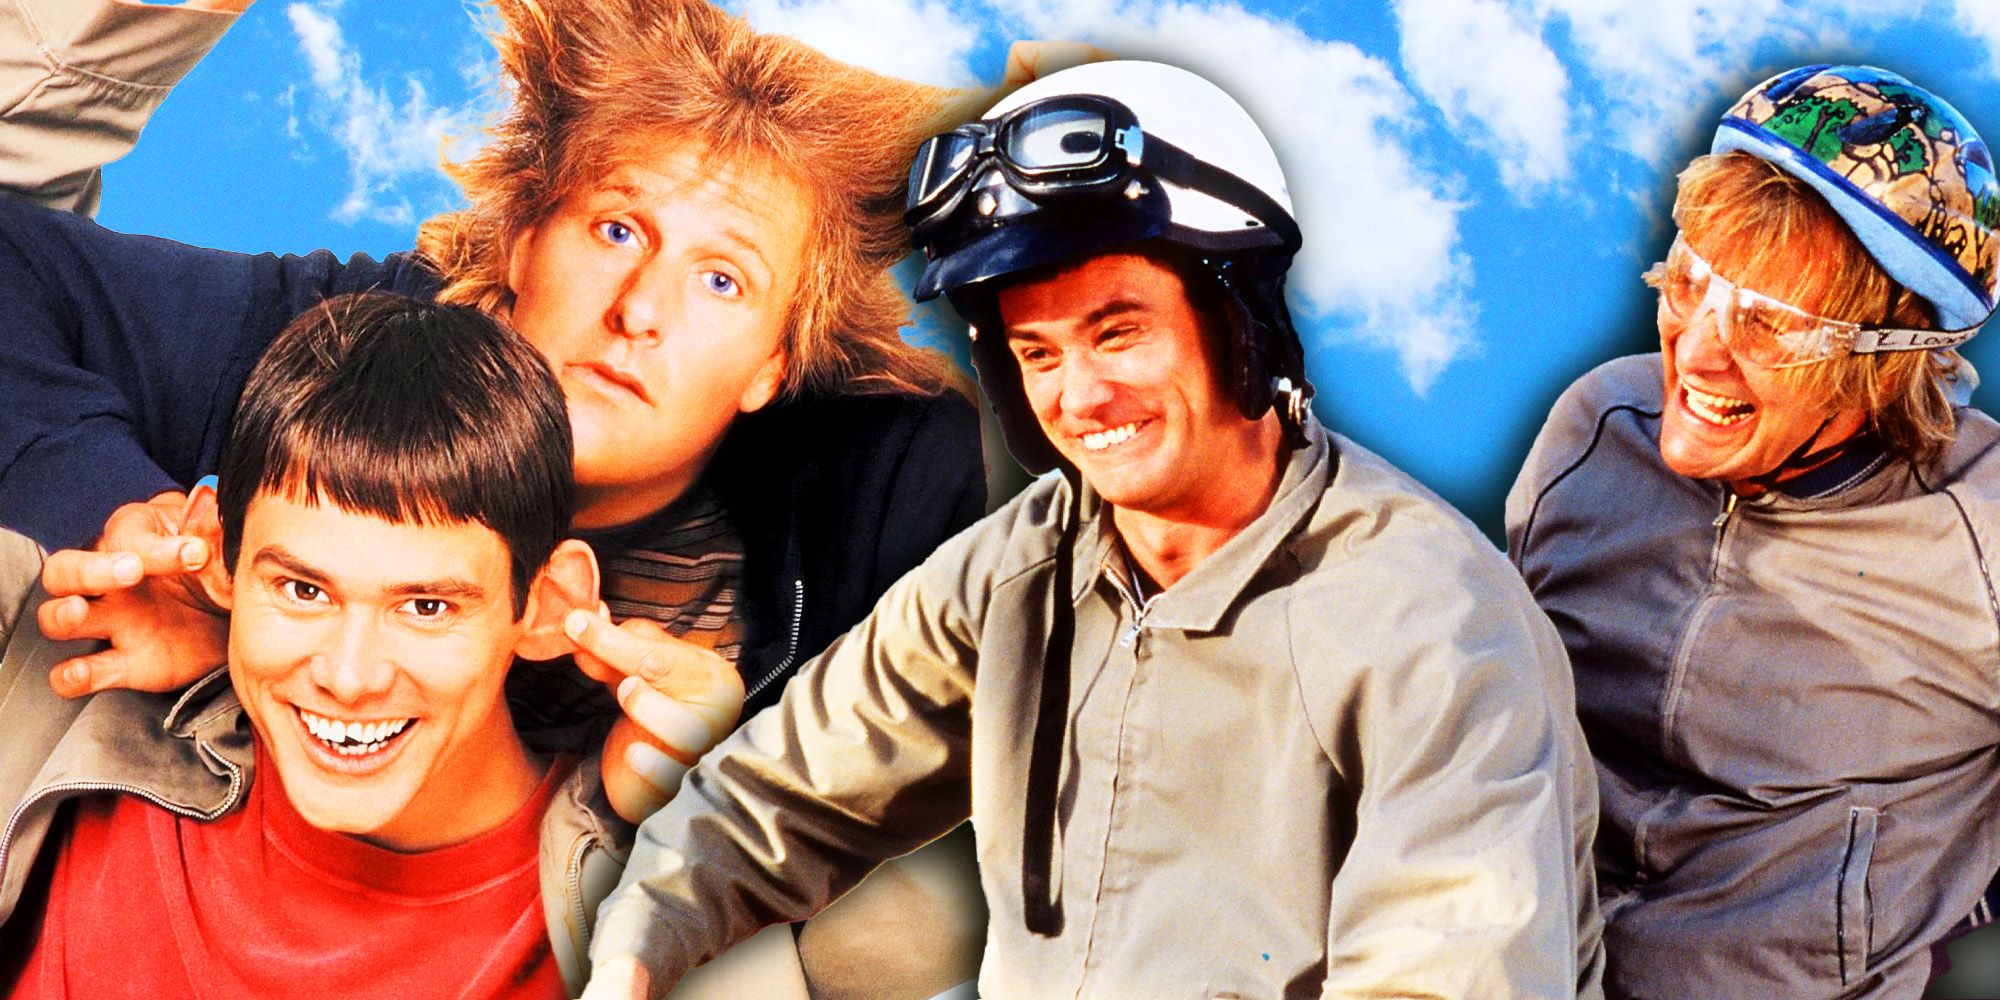 25 Hilarious Quotes From Dumb And Dumber That Are Still Funny Today